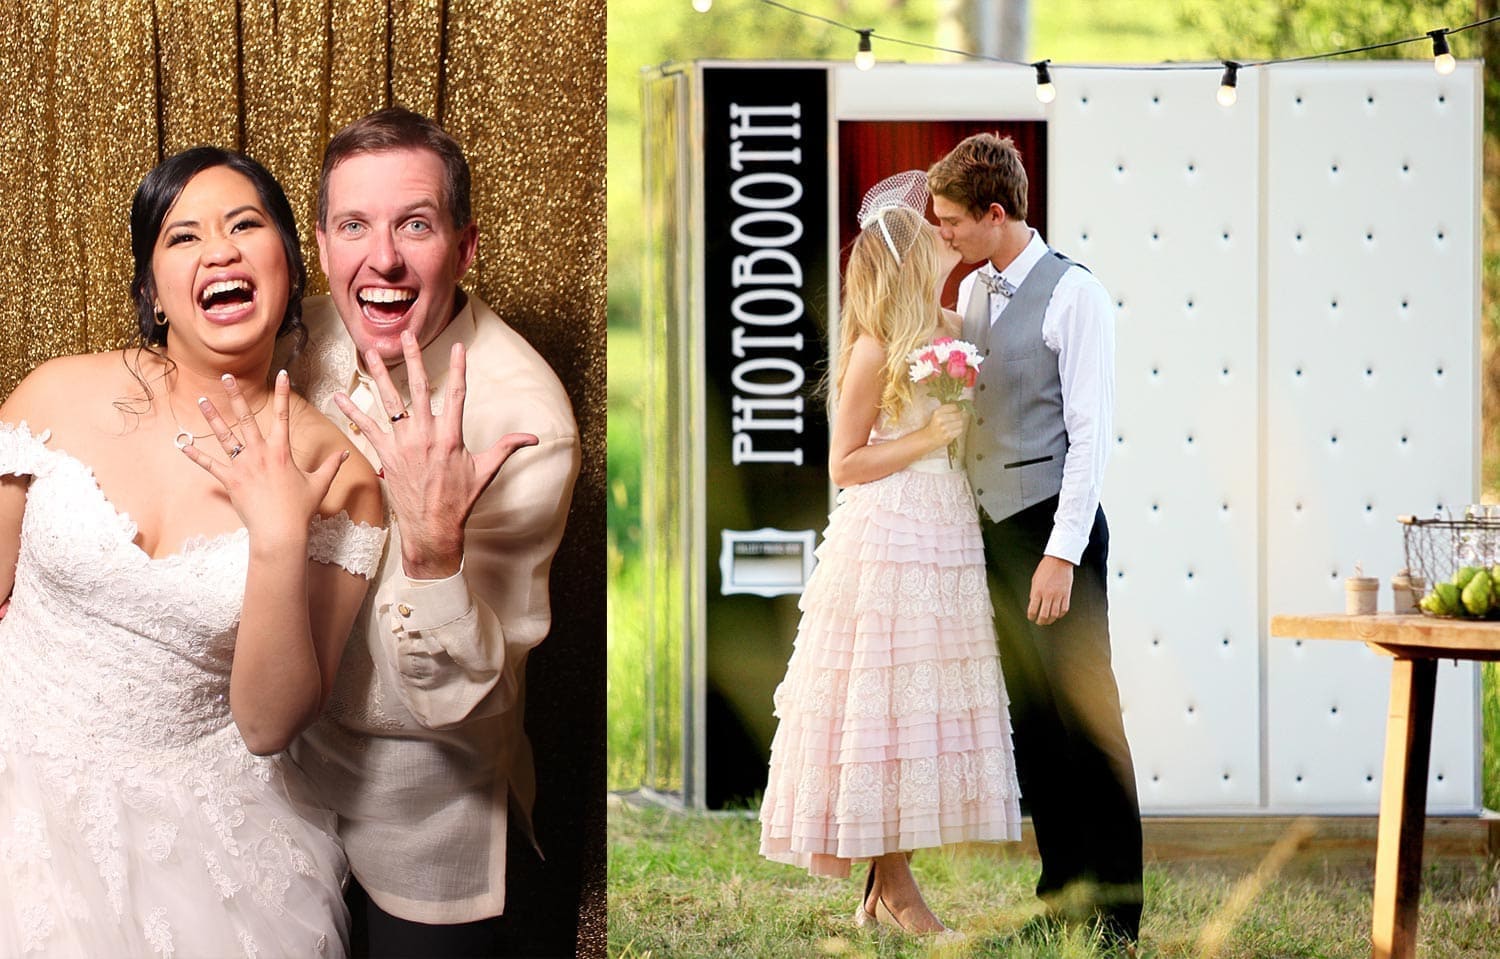 photo booth hire melbourne - in the booth